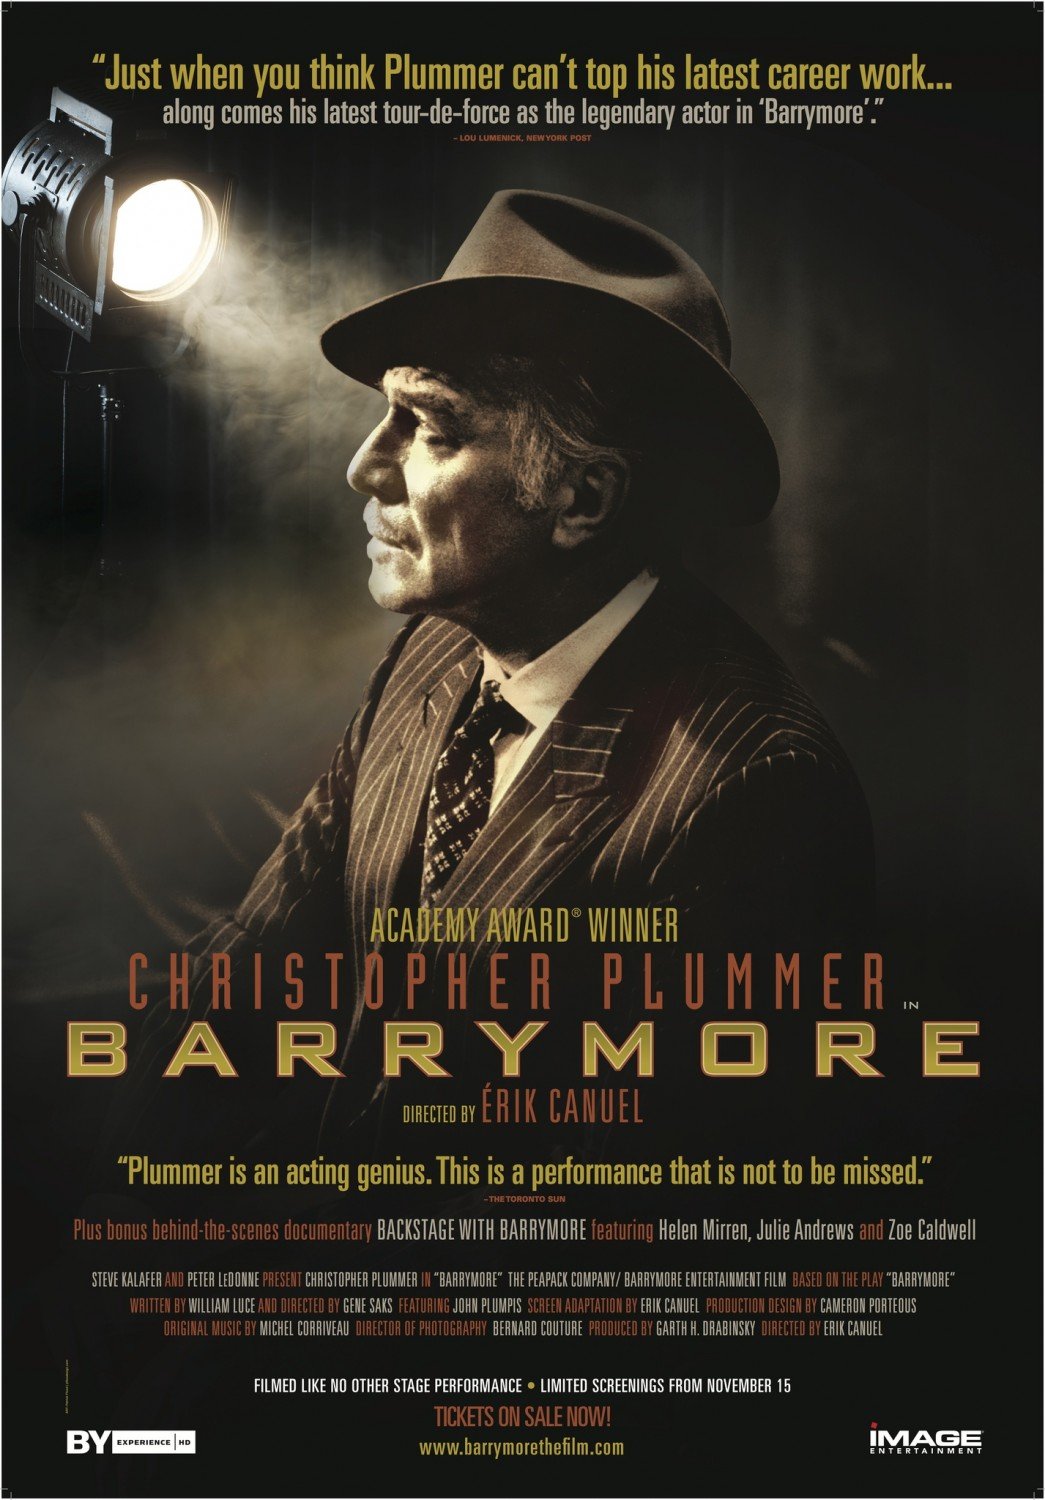 Poster of the movie Barrymore